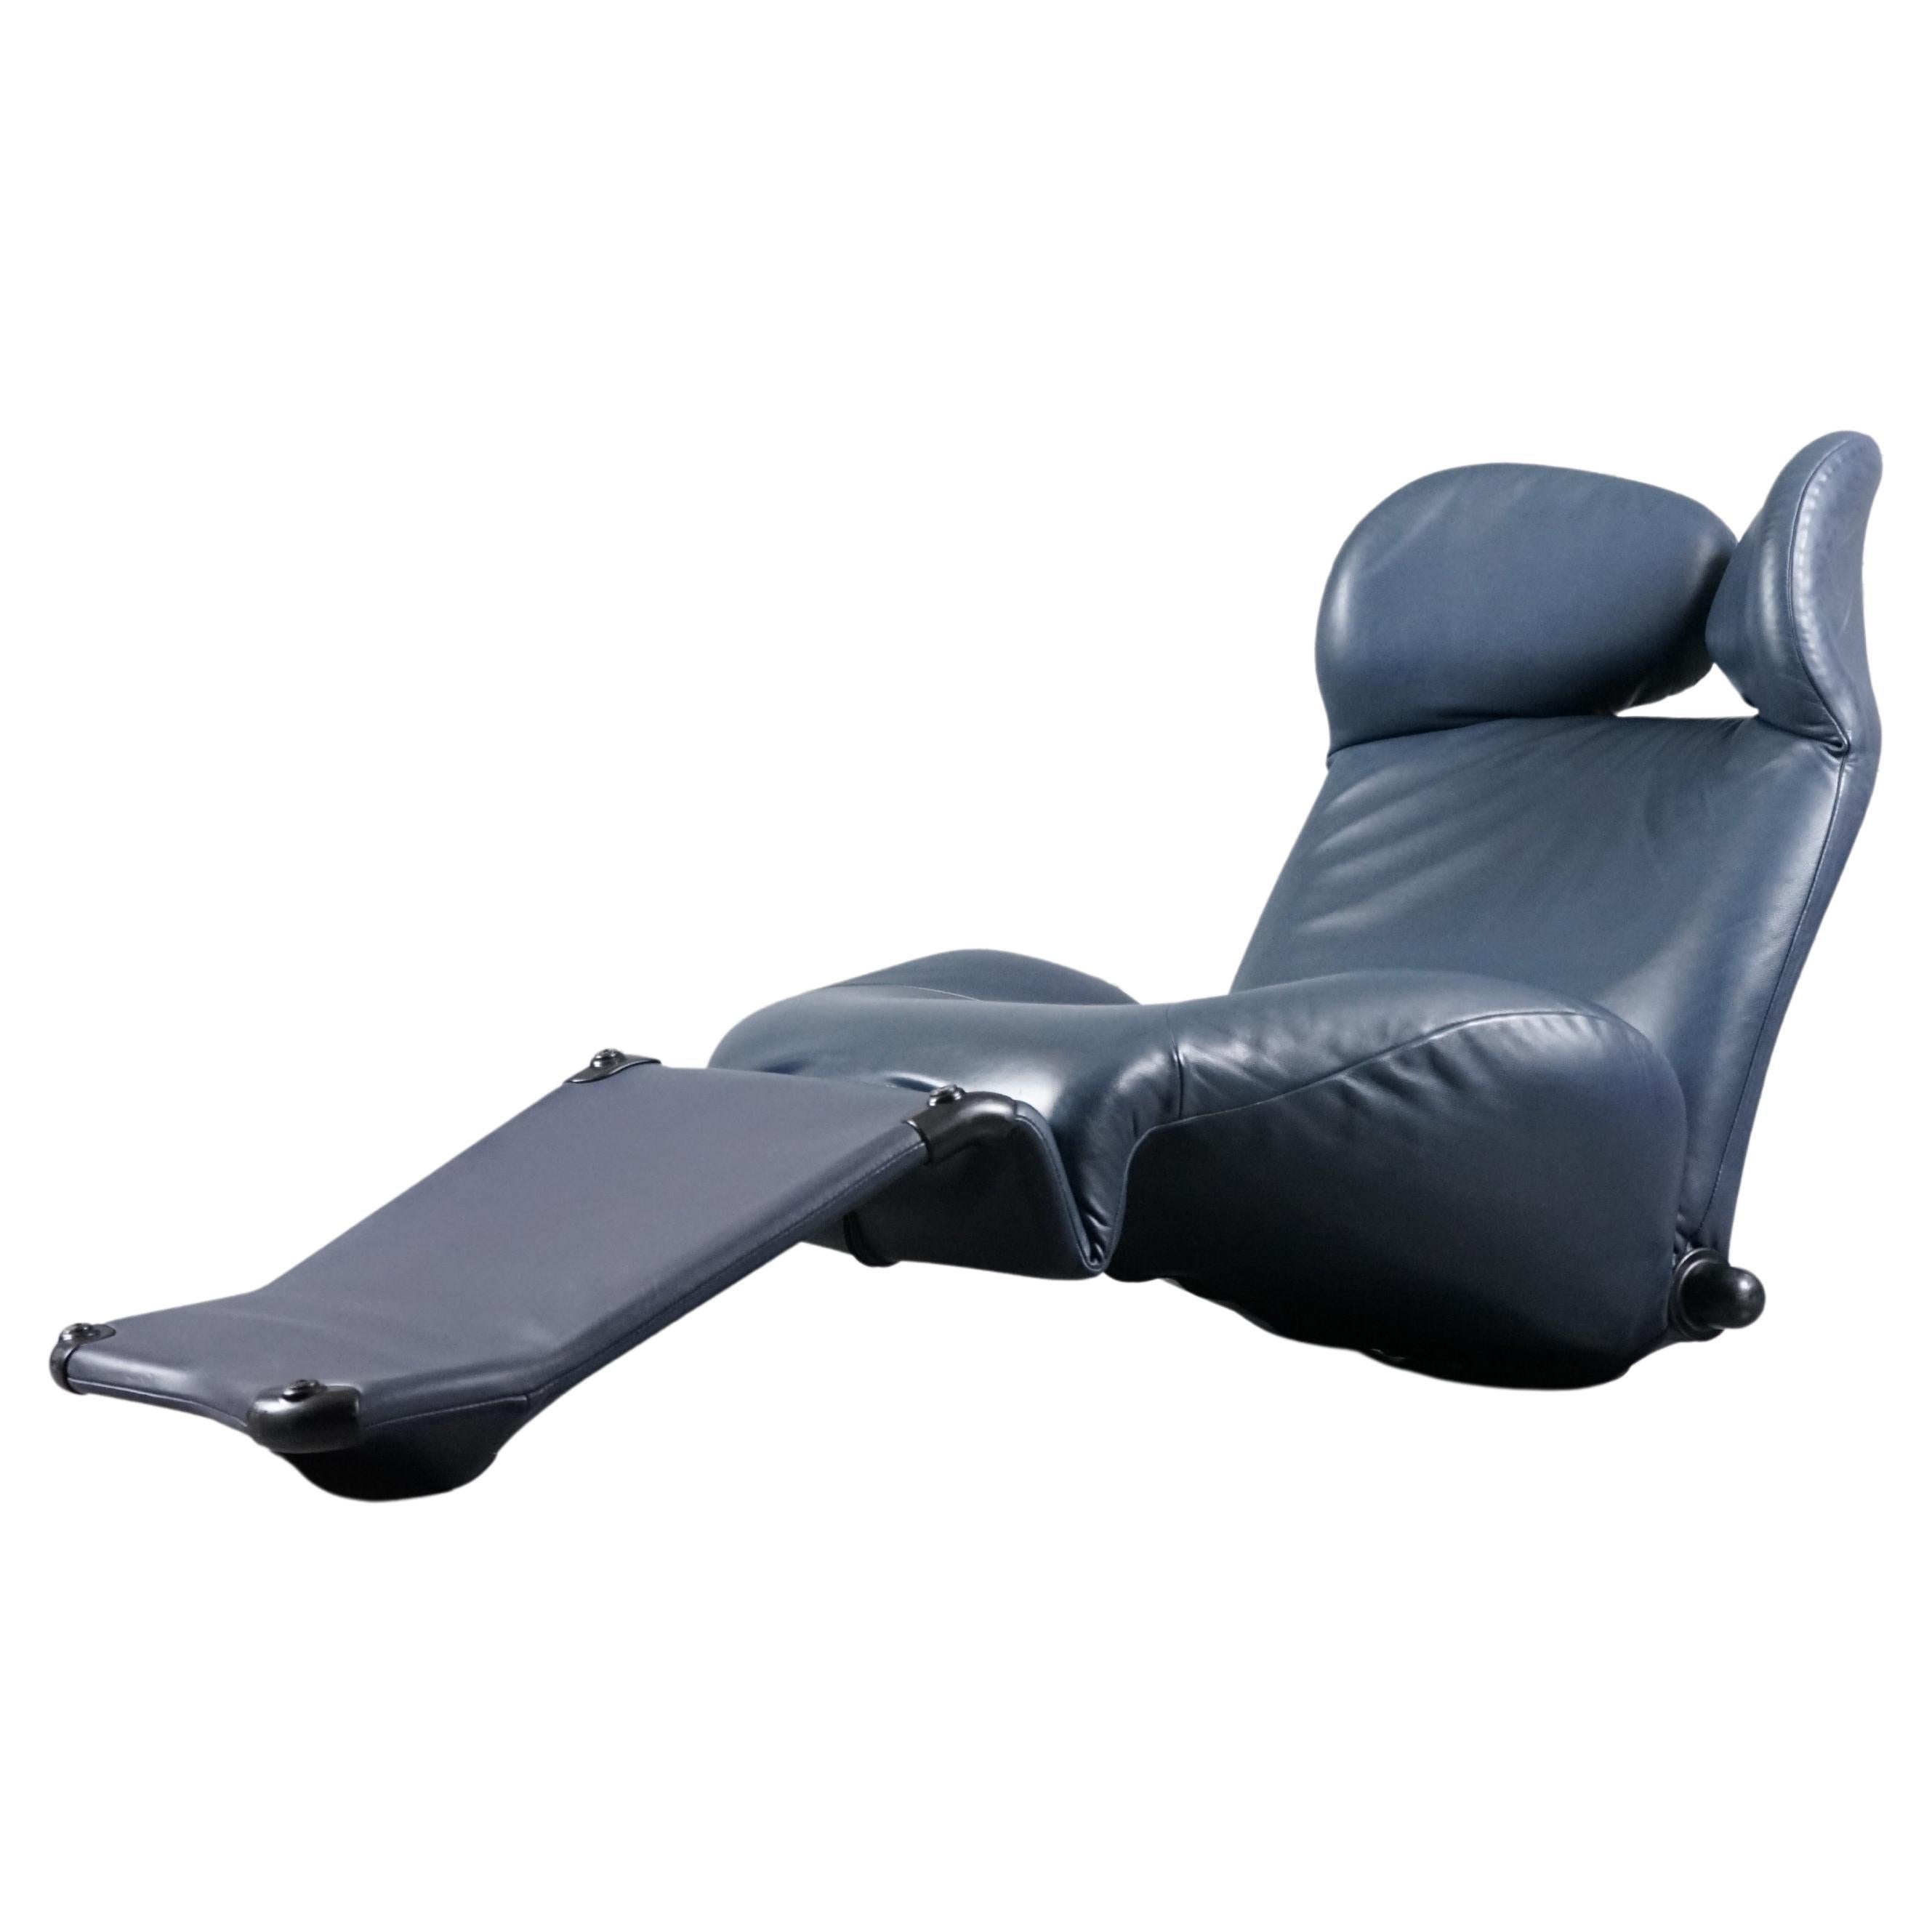 Grey-Blue Leather Wink Lounge Chair by Toshiyuki Kita for Cassina, 1980s For Sale